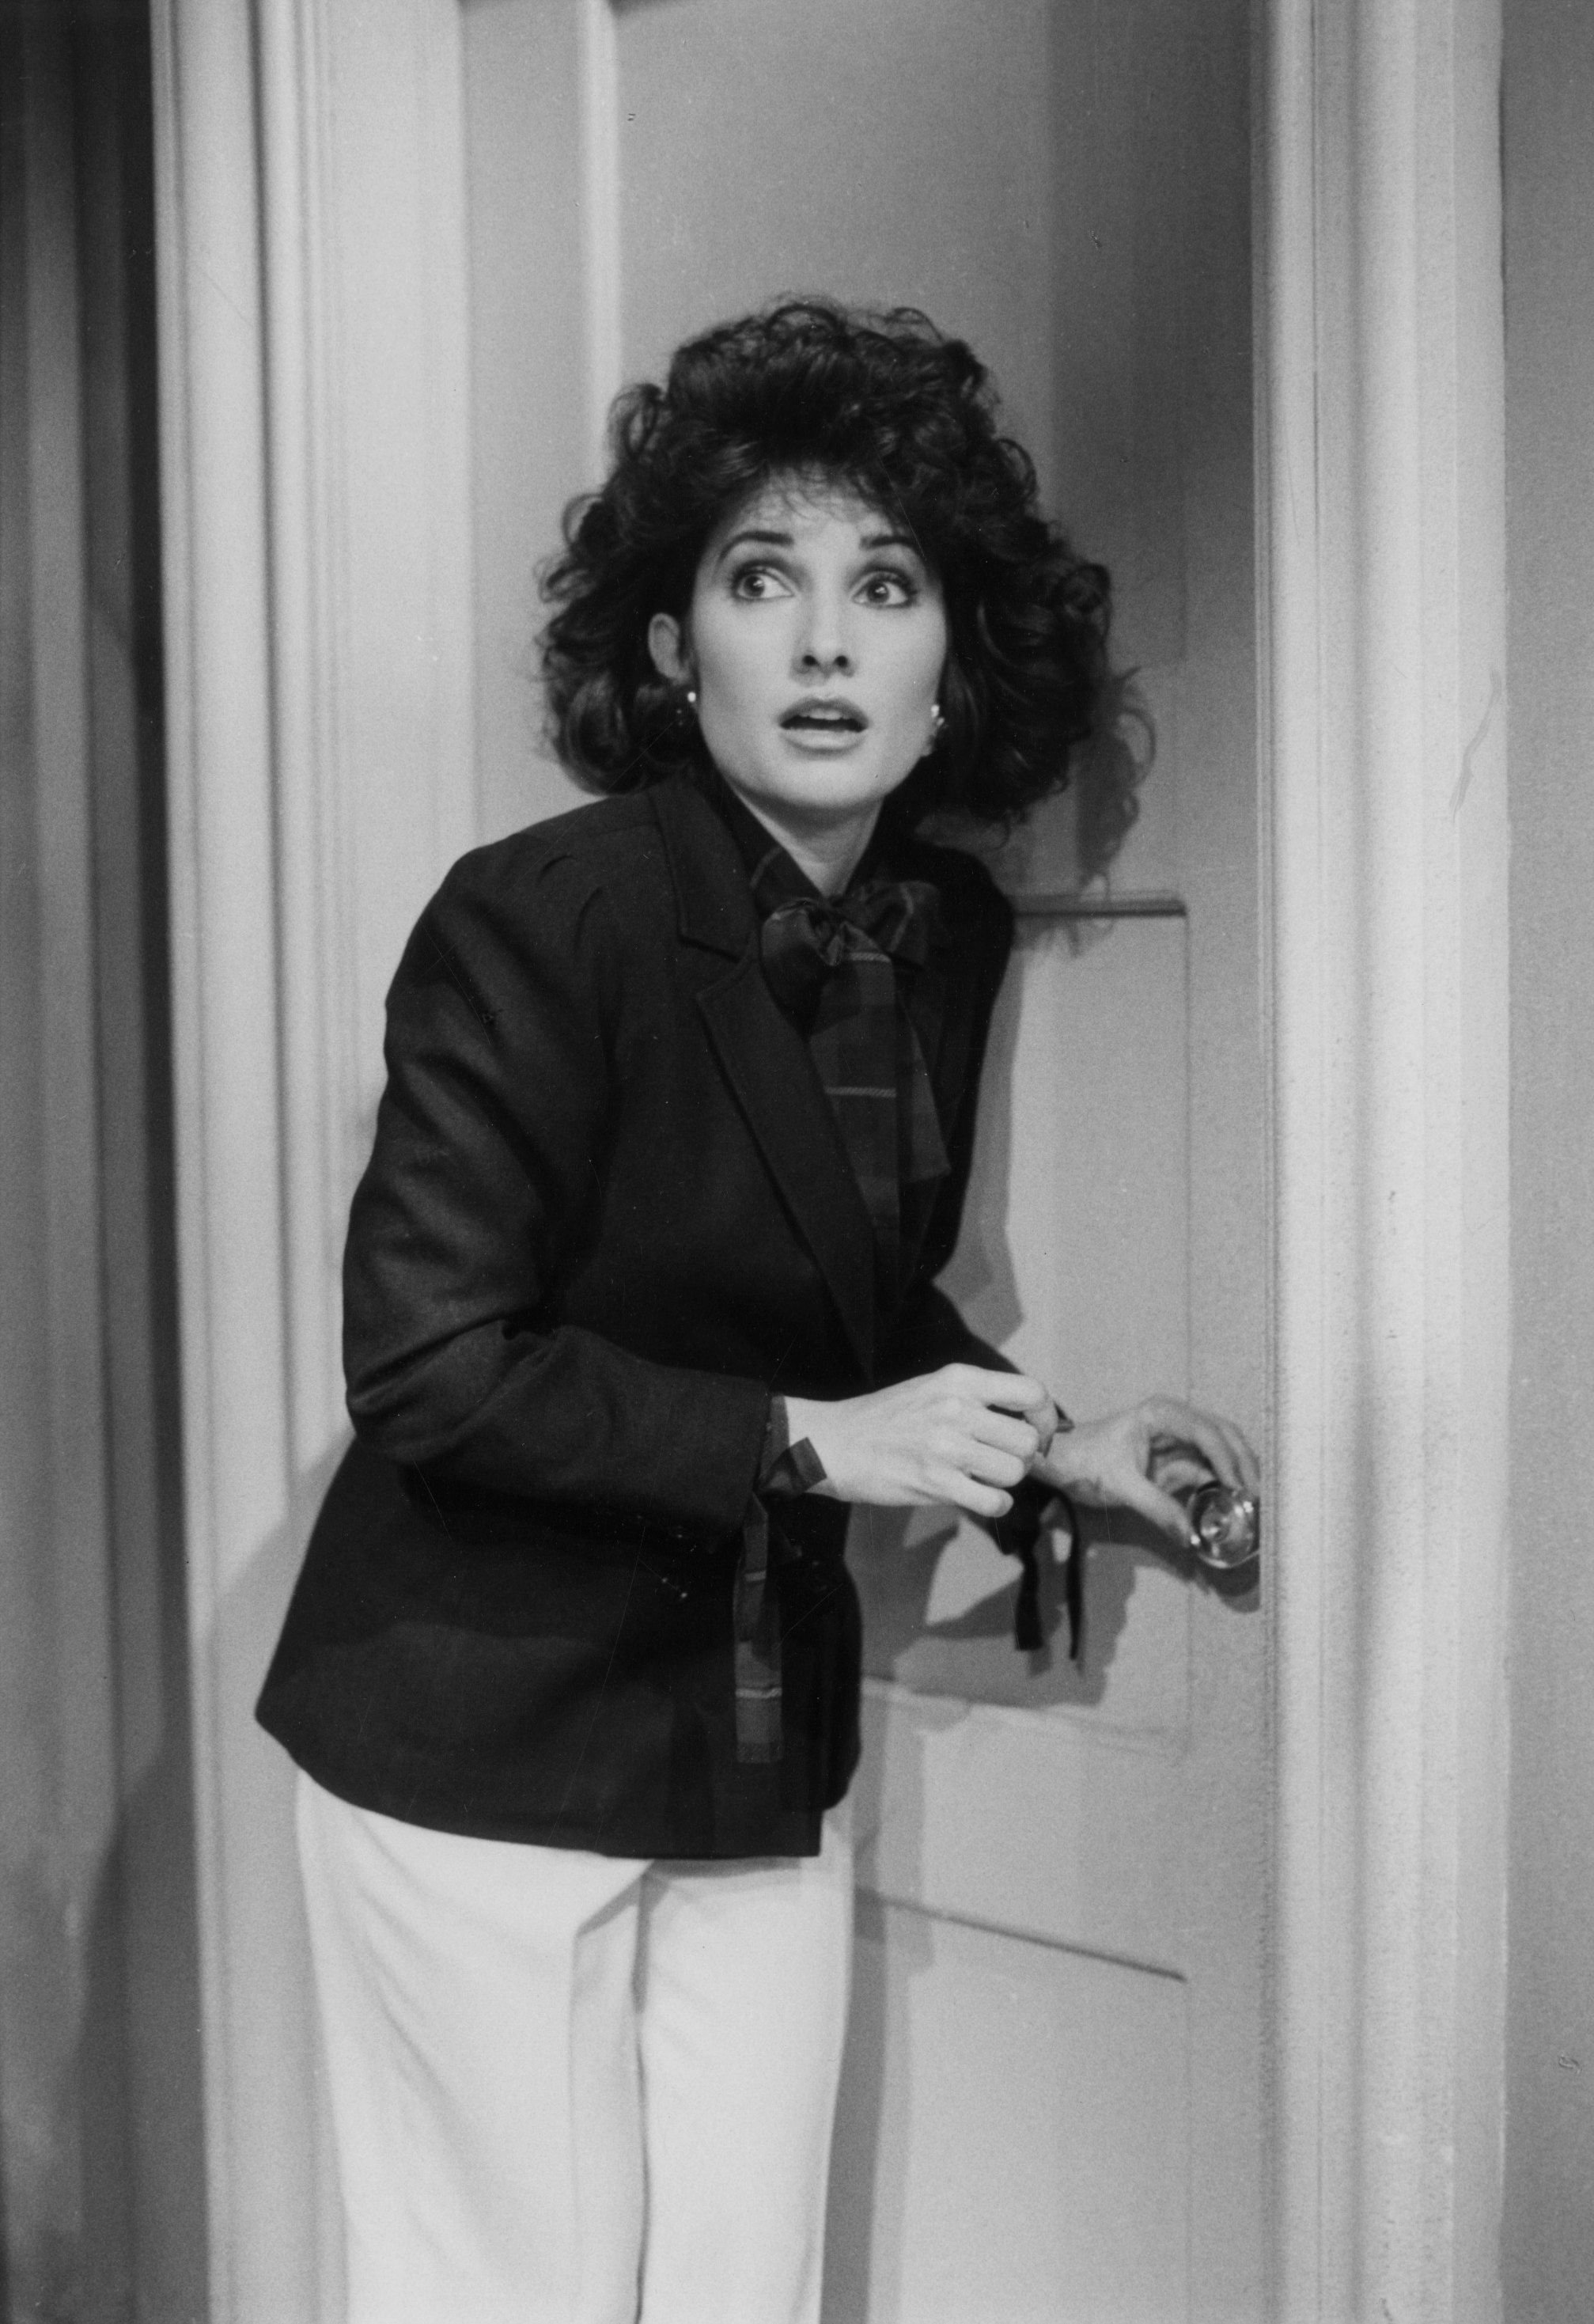 Susan Lucci as Erica Kane on an episode of "All My Children" in 1984. | Source: ABC Photo Archives/Disney General Entertainment Content/Getty Images